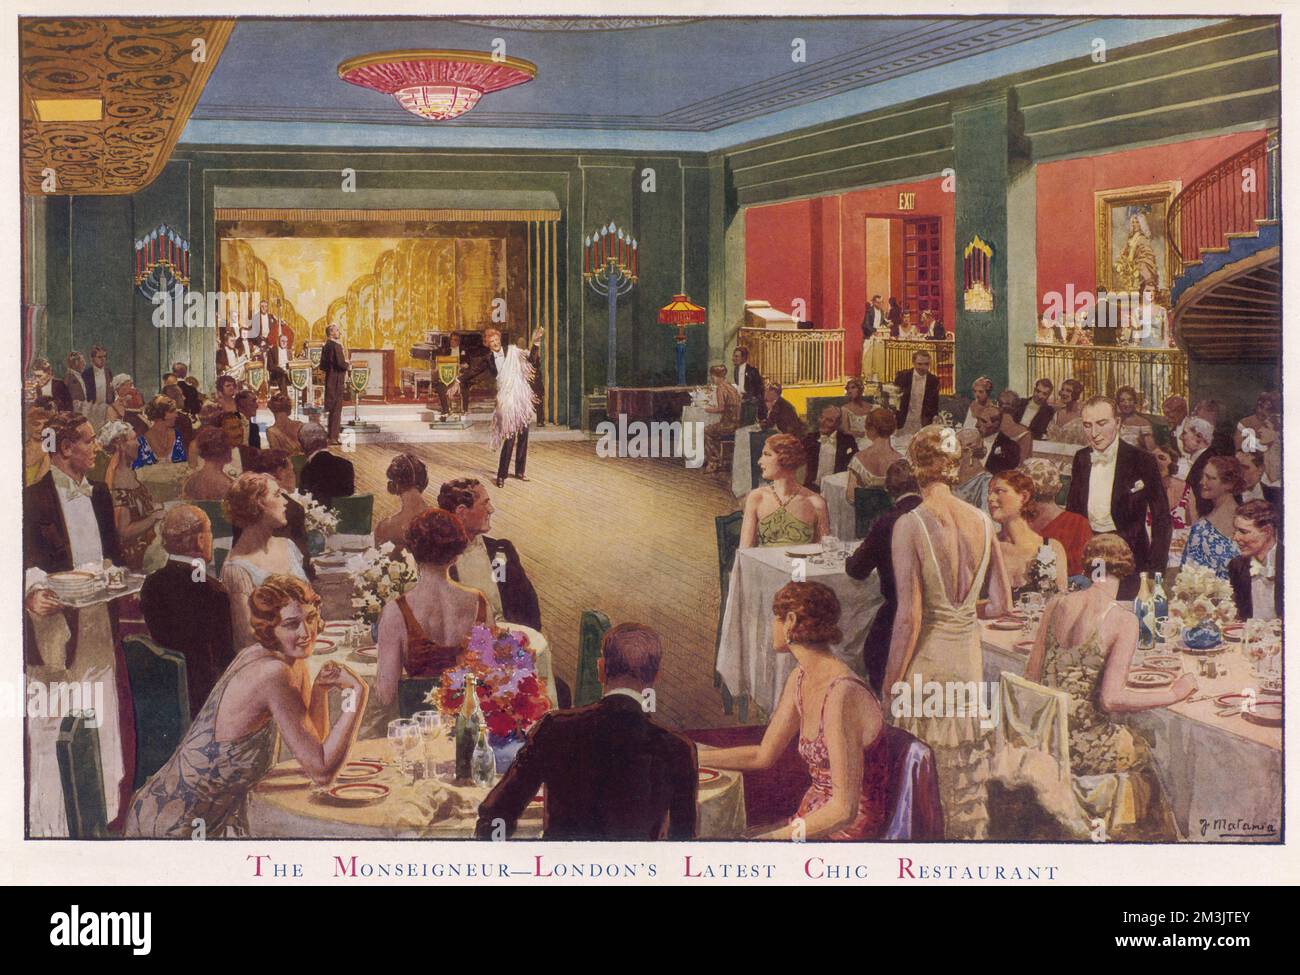 Evening at The Monseigneur, a fashionable London restaurant, with diners watching a cabaret performance. The Monseigneur Restaurant was one of three main hot spots for dance music in the 1930s. It shared rival prominence with the Savoy Restaurant and the Mayfair Hotel as the top showcases for the popular music of the day. Roy Fox and Lew Stone were the bandleaders who inhabited the Monseigneur during the depression years in the UK. The well-known restaurateur, M. Taglioni is seen standing in the right foreground.     Date: 1931 Stock Photo